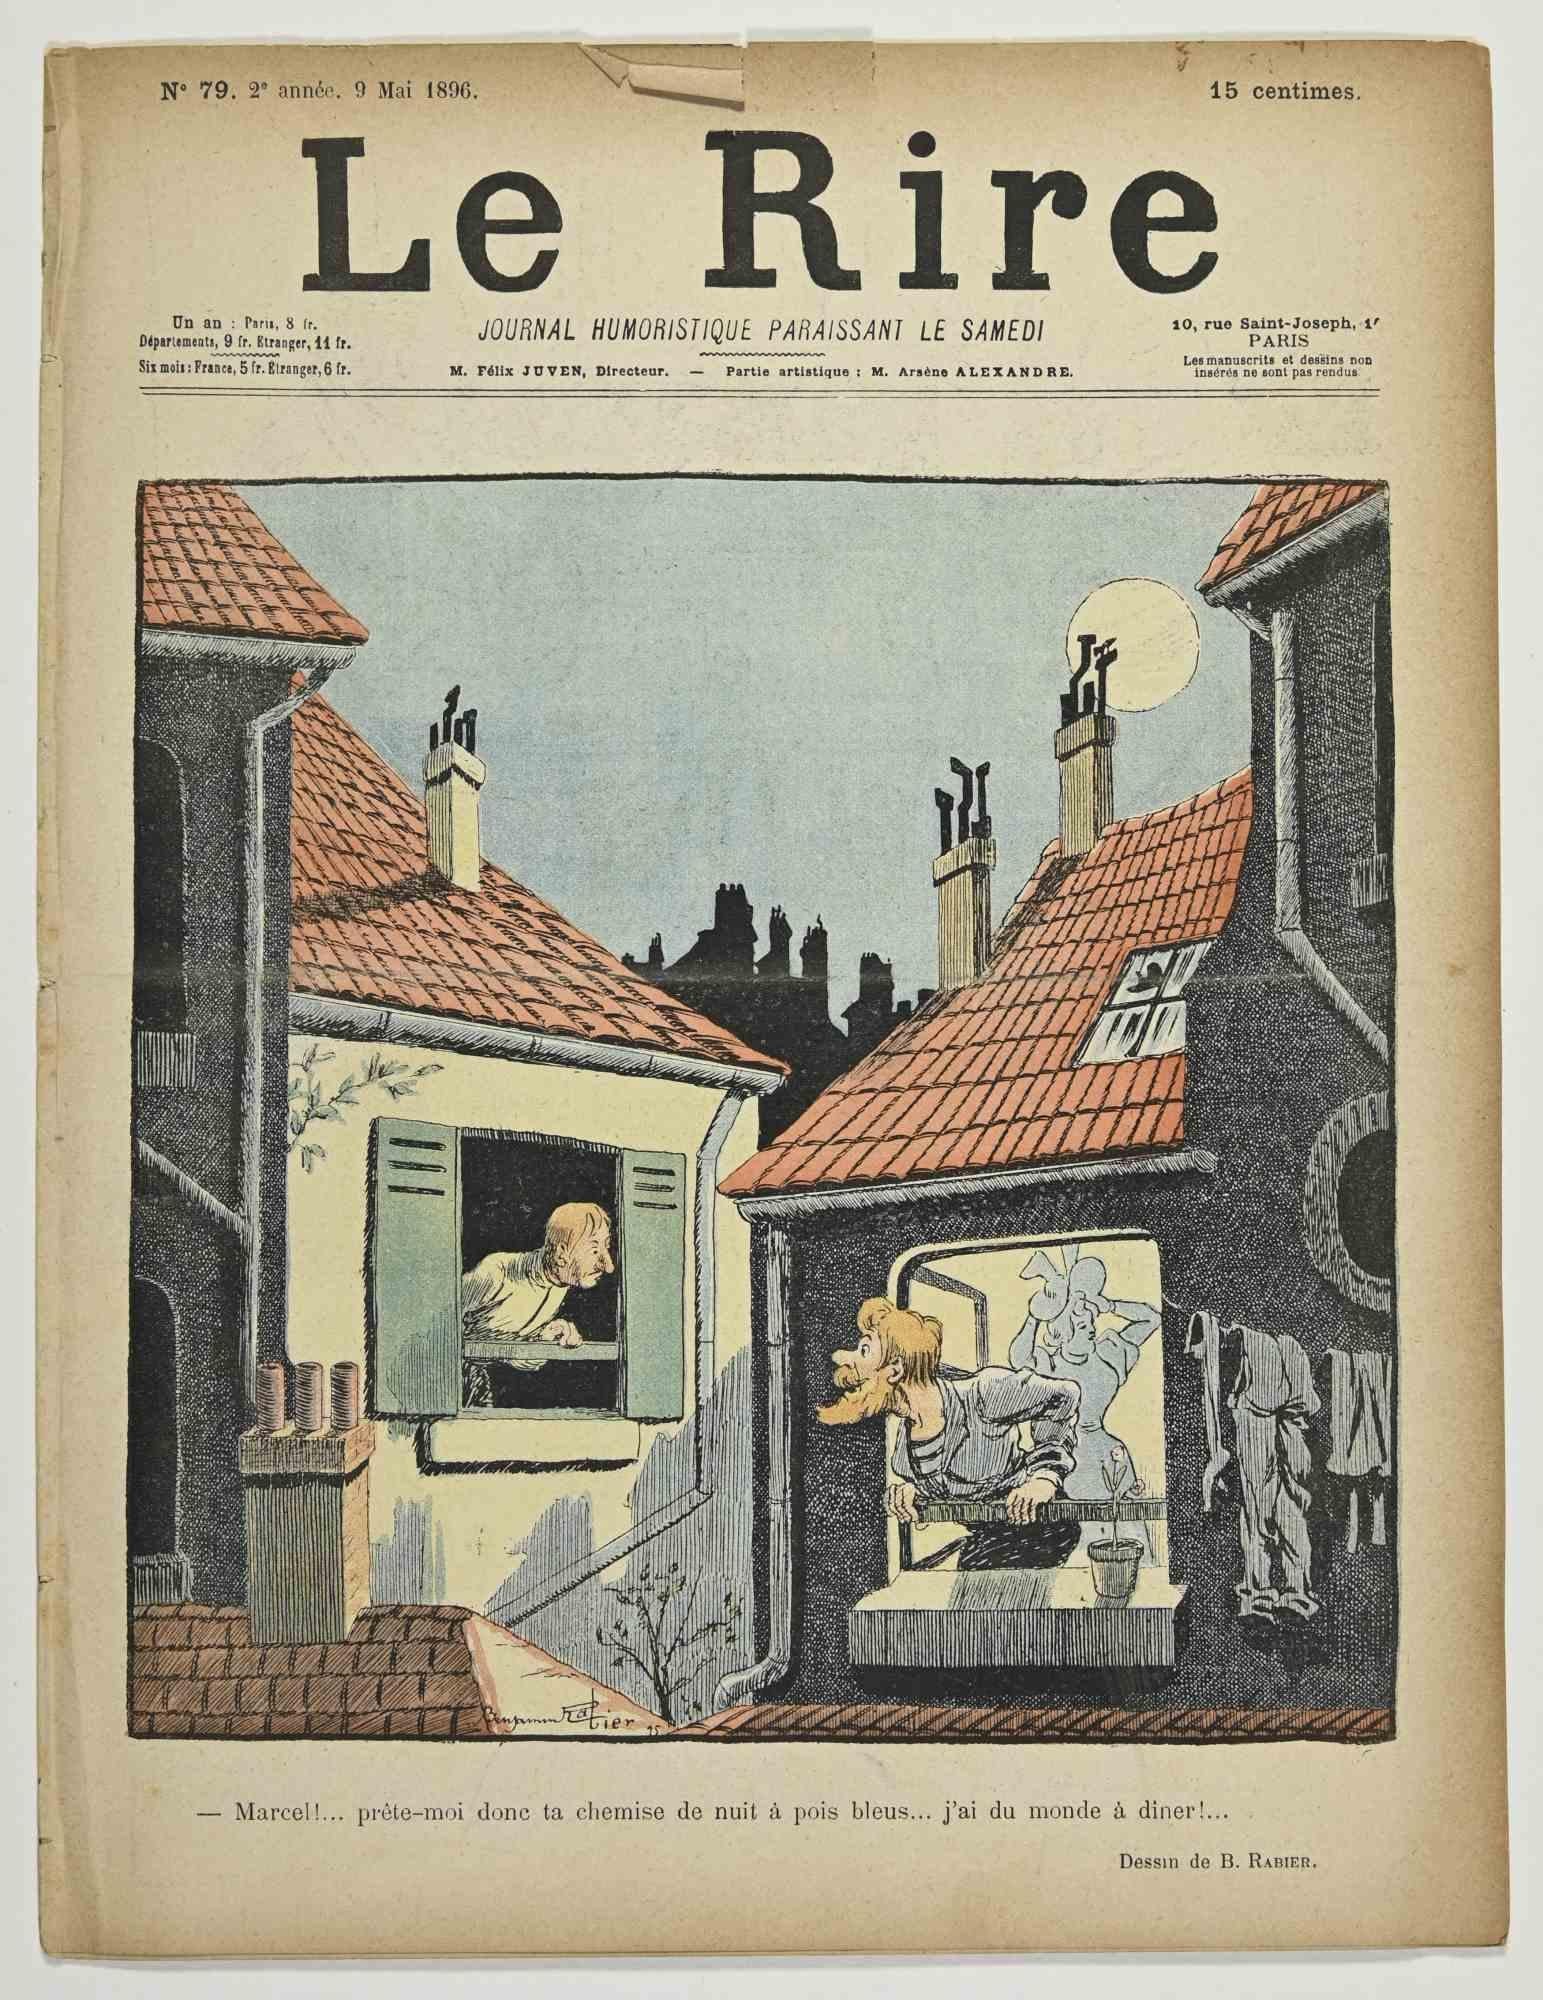 Le Rire is a Comic Magazine published in 1896, reproducing drawings by Charles Huard (1874–1965).

